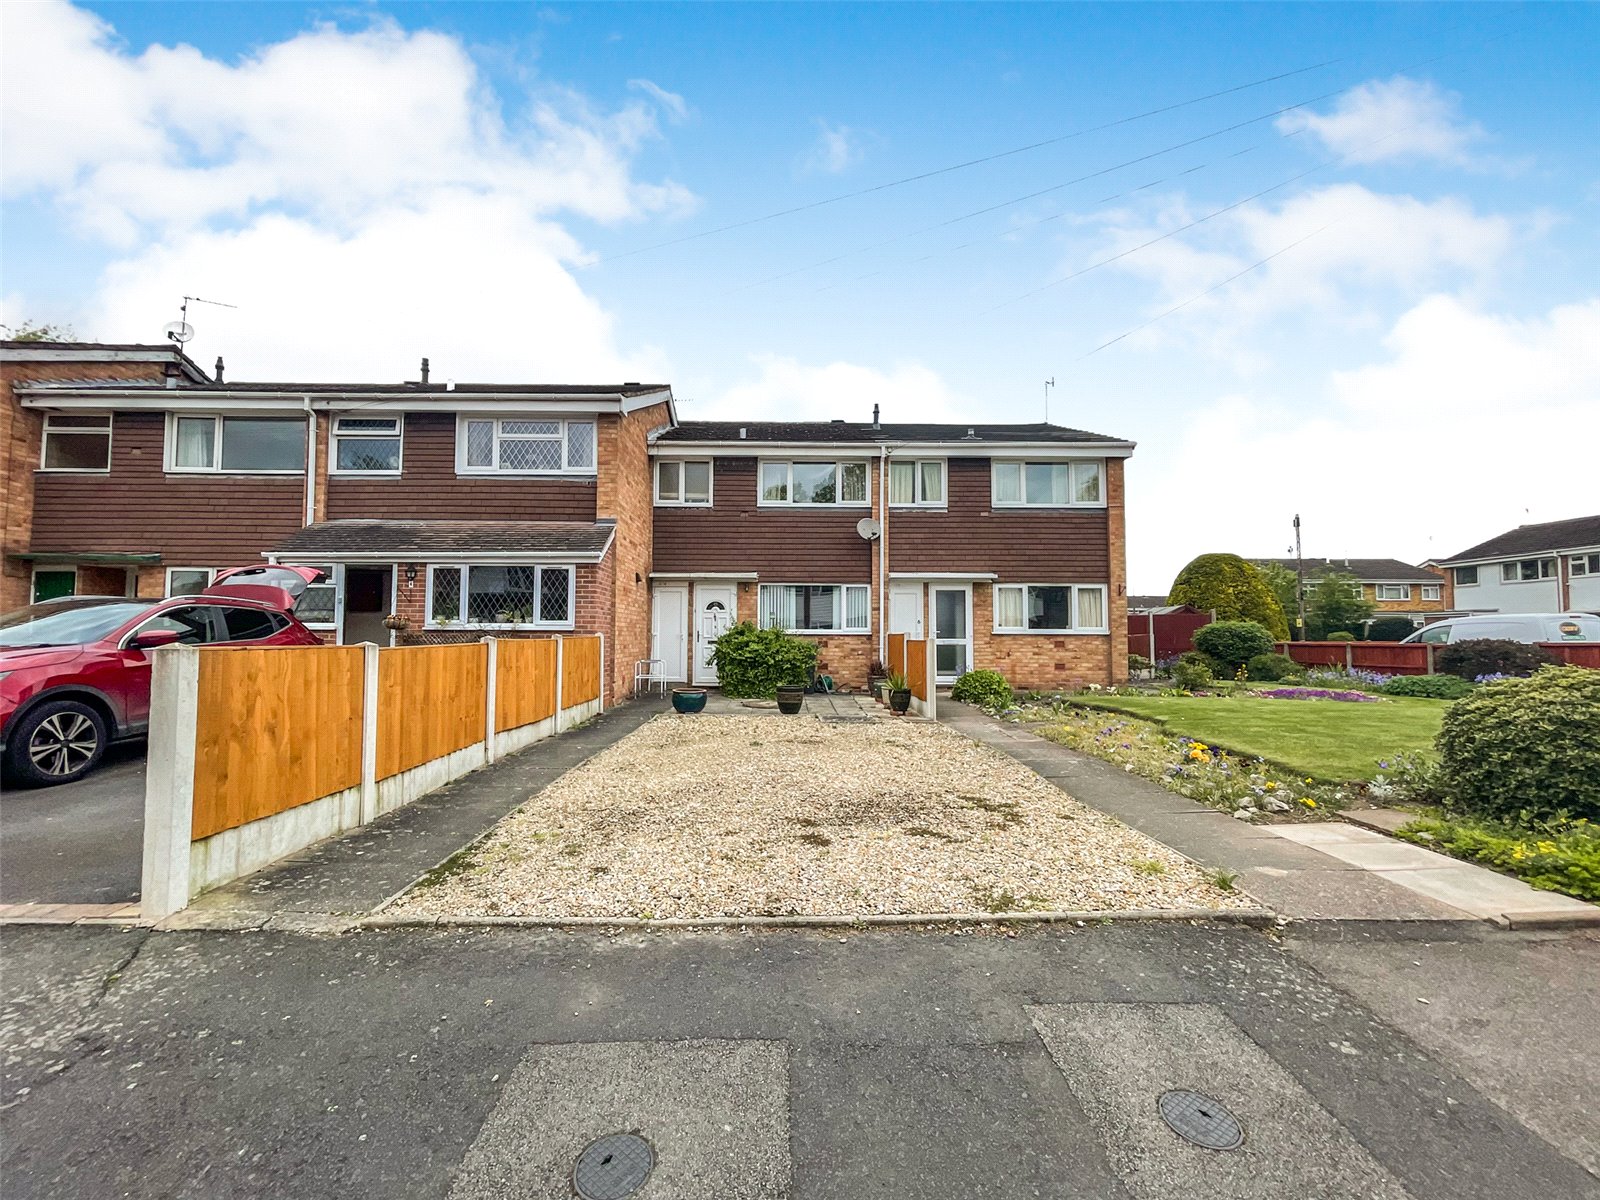 Whitville Close, Kidderminster, Worcestershire, DY11